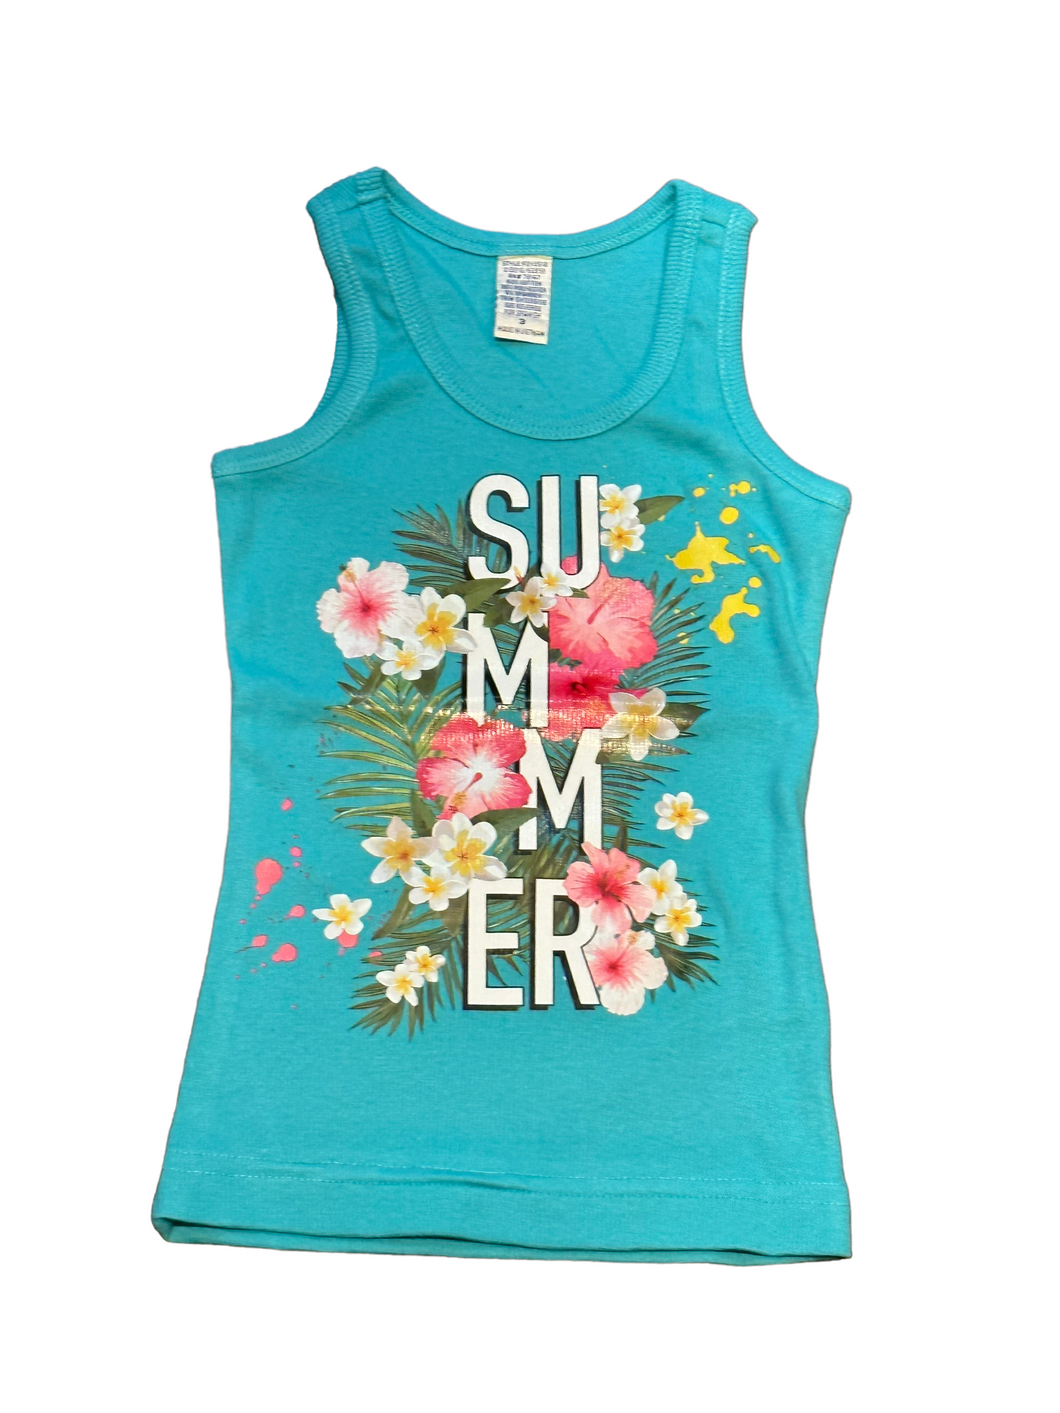 CLEARANCE - Summer Turquoise Tank - Size 3